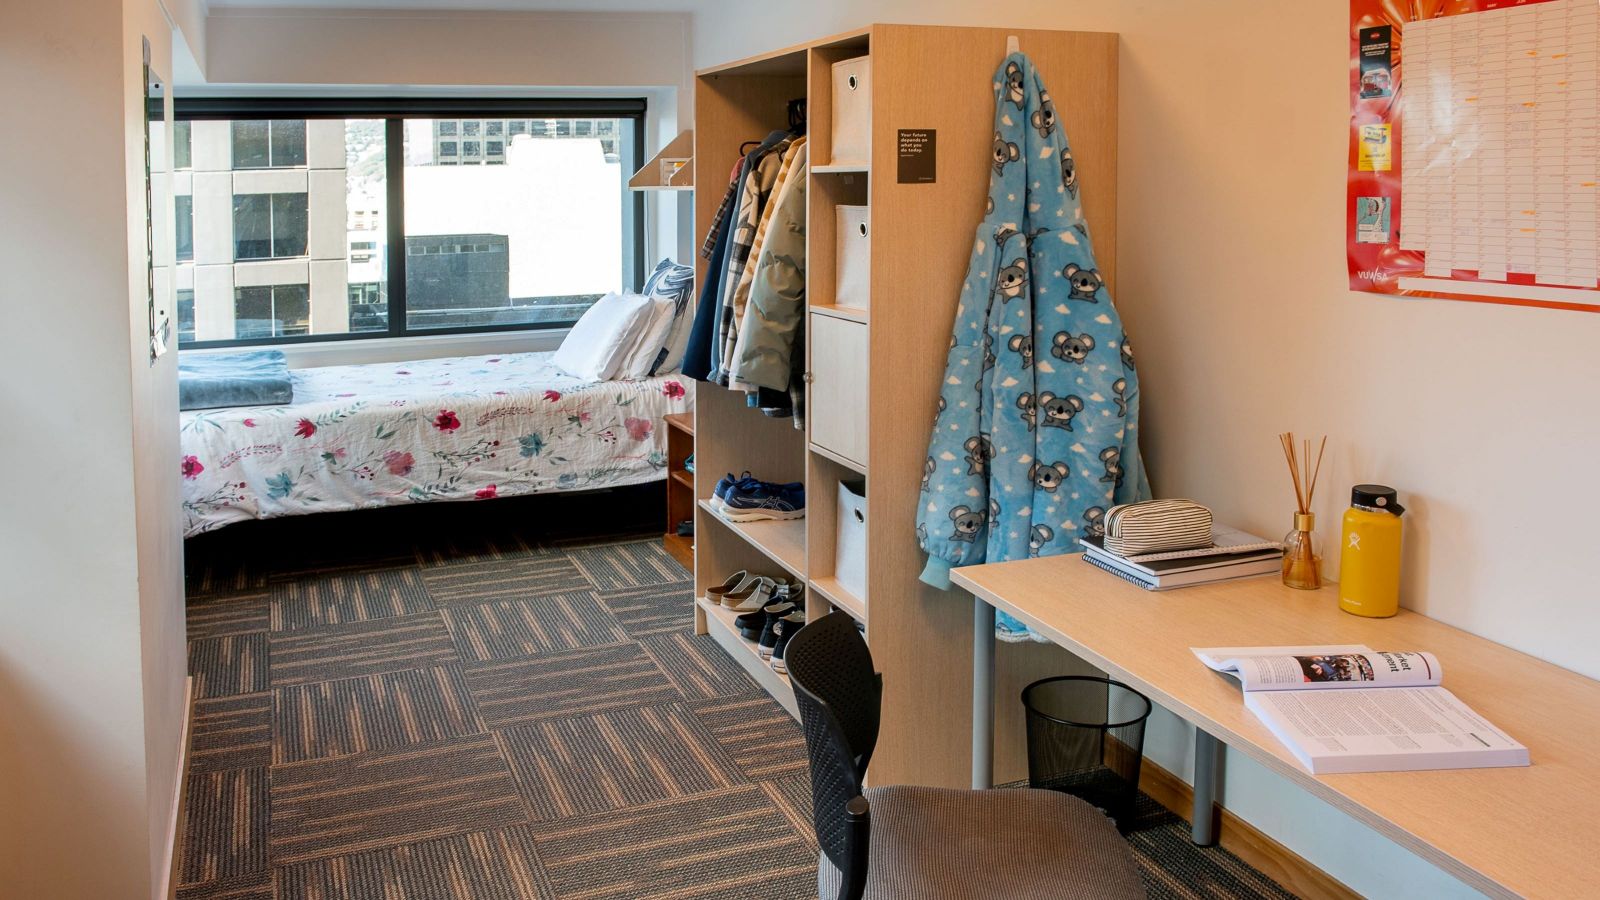 Single bedroom at Katharine Jermyn Hall with modern furnishings;a bed next to a large window, a wardrobe unit, desk and chair.